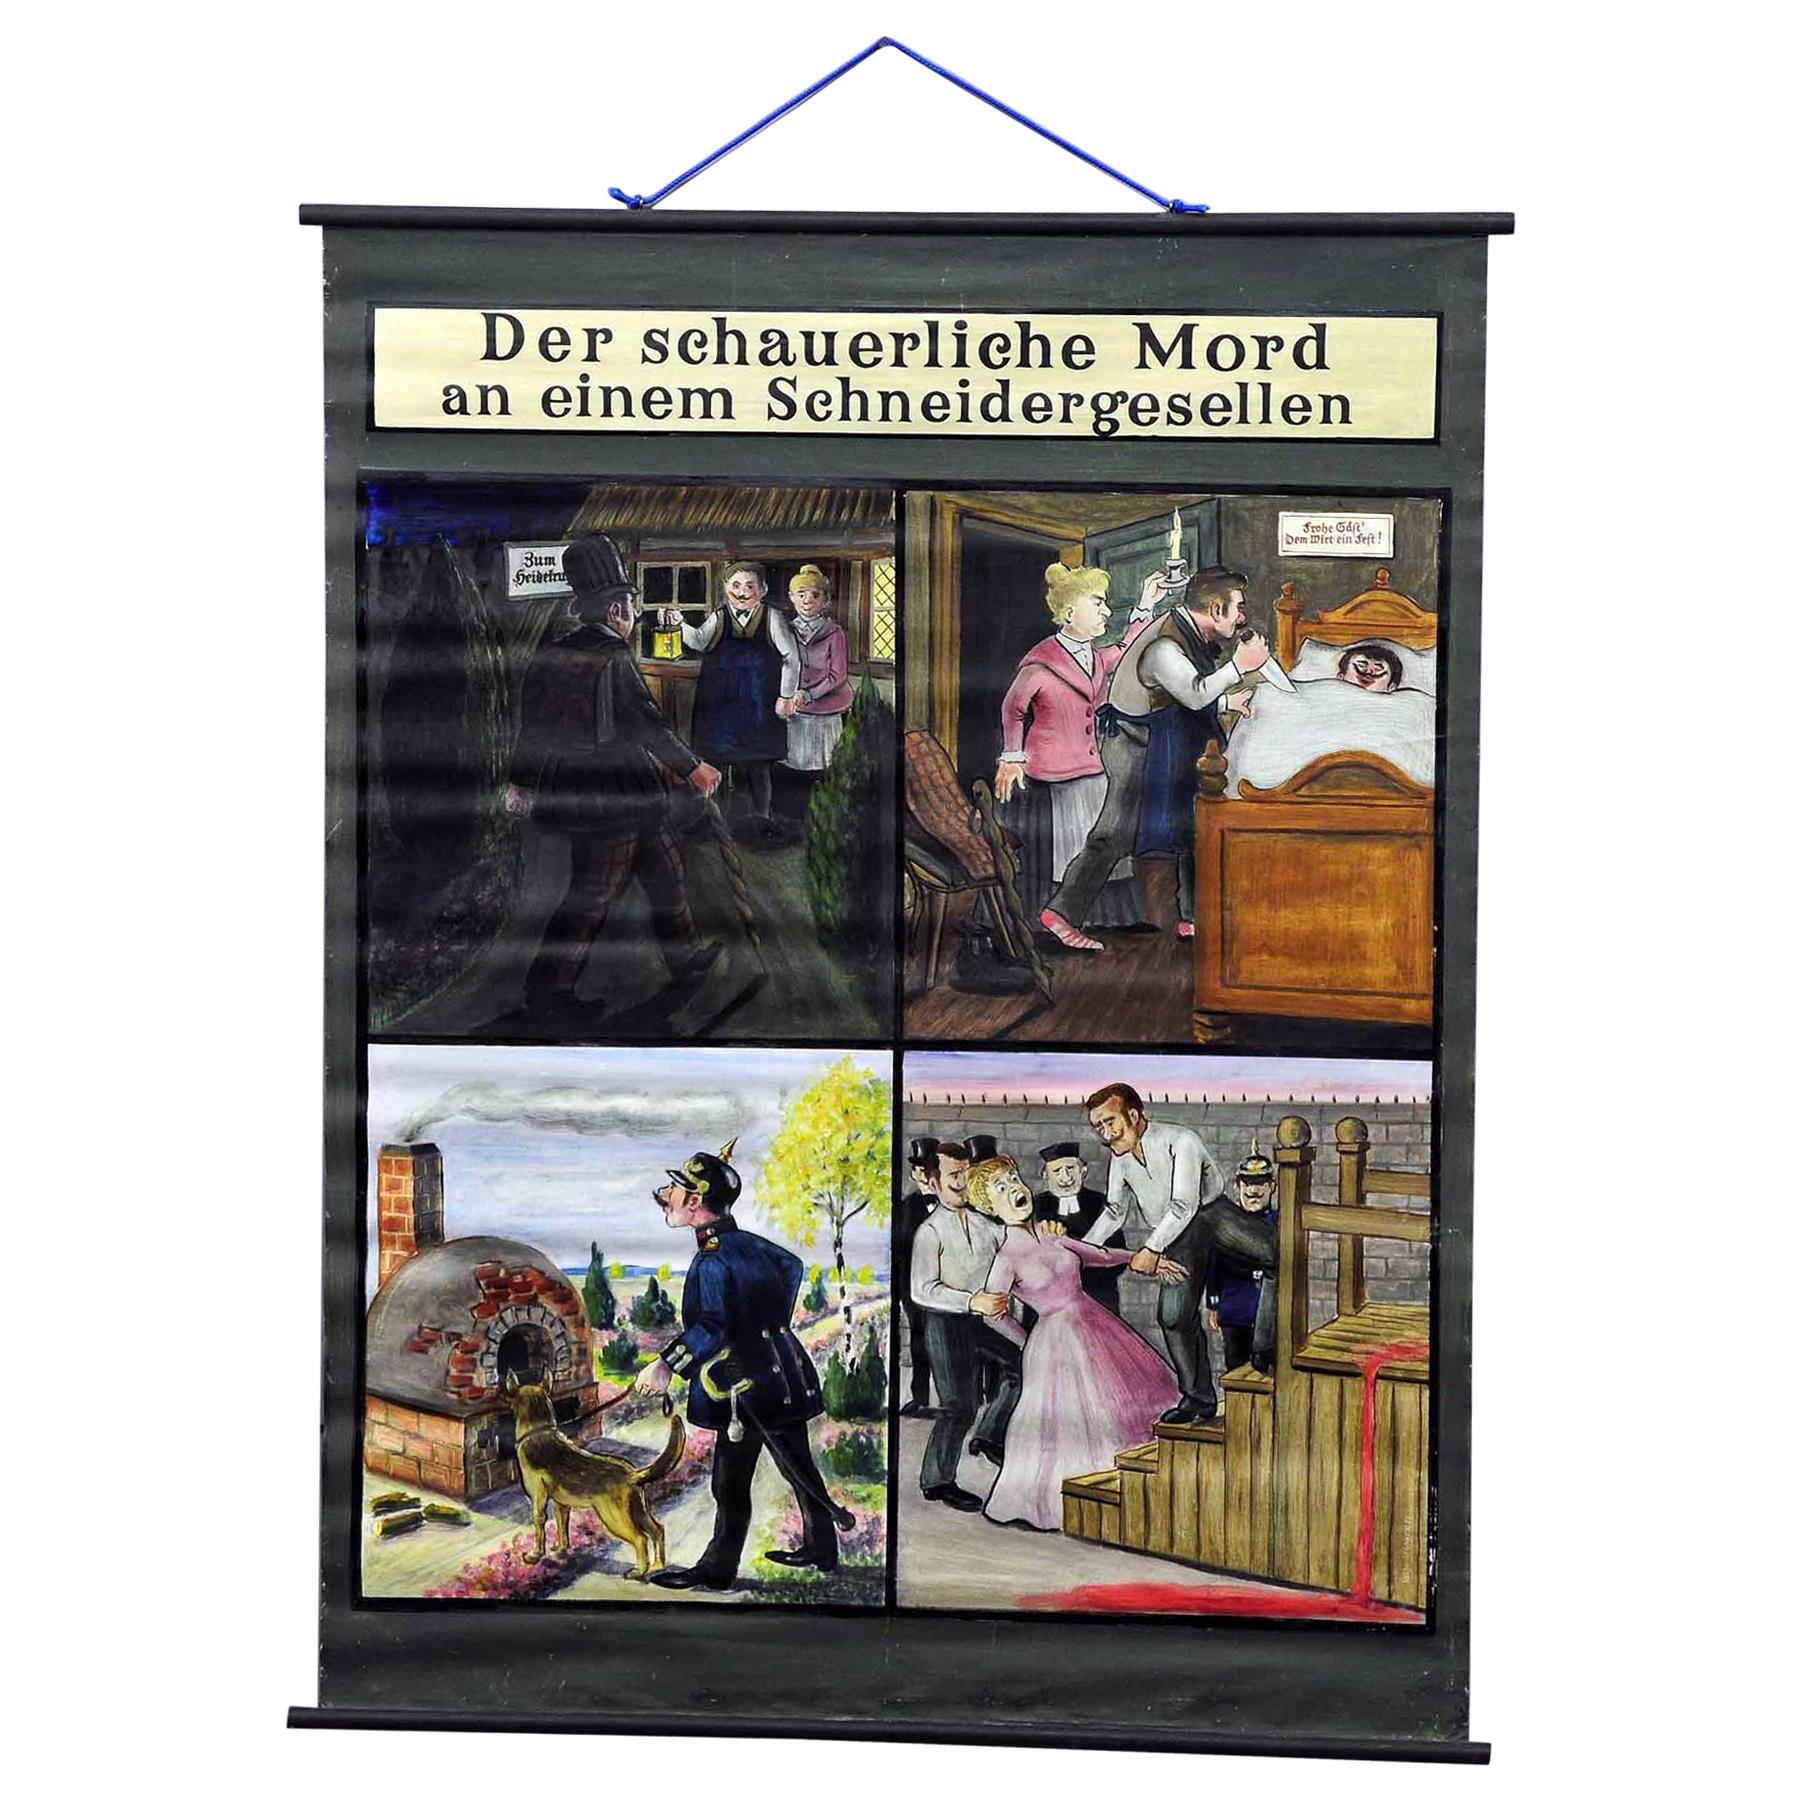 Hand Painted Wall Decoration Chart Depicting the Story of a Murder Ballade